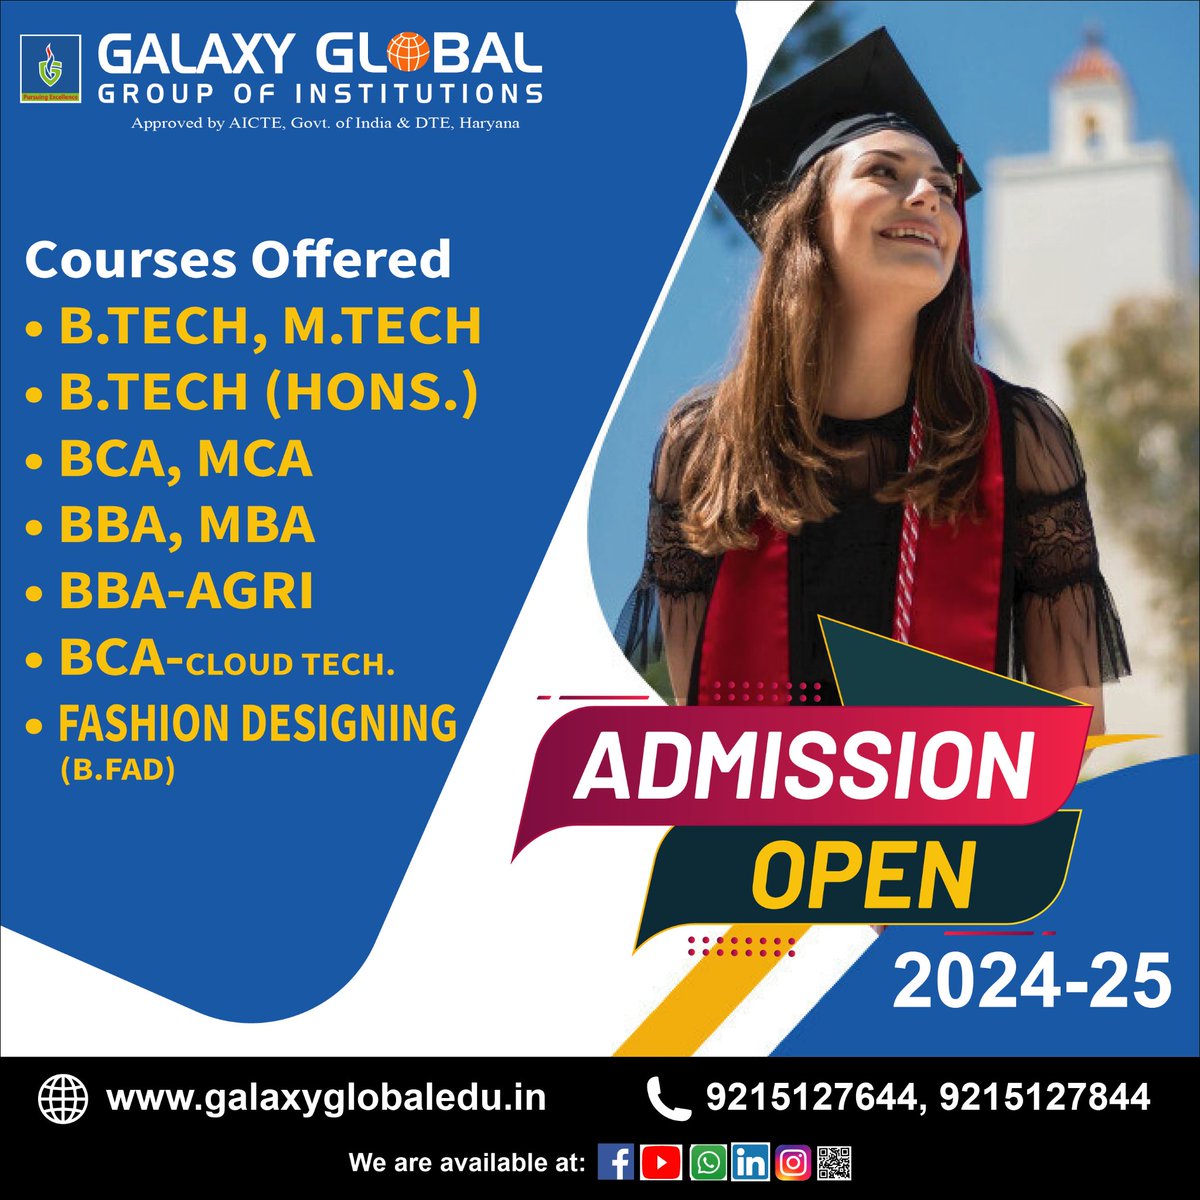 'The purpose of education is to replace an empty mind with an open one.' - Malcolm S. Forbes Admission open @ 2024-25 Enroll Now. #bba #bca #fashiondesigning #btech #mtech #mca #mba #bharmacy #dpharmacy #admissions2024 #agribusiness #cloudtechnology #informationsecurity